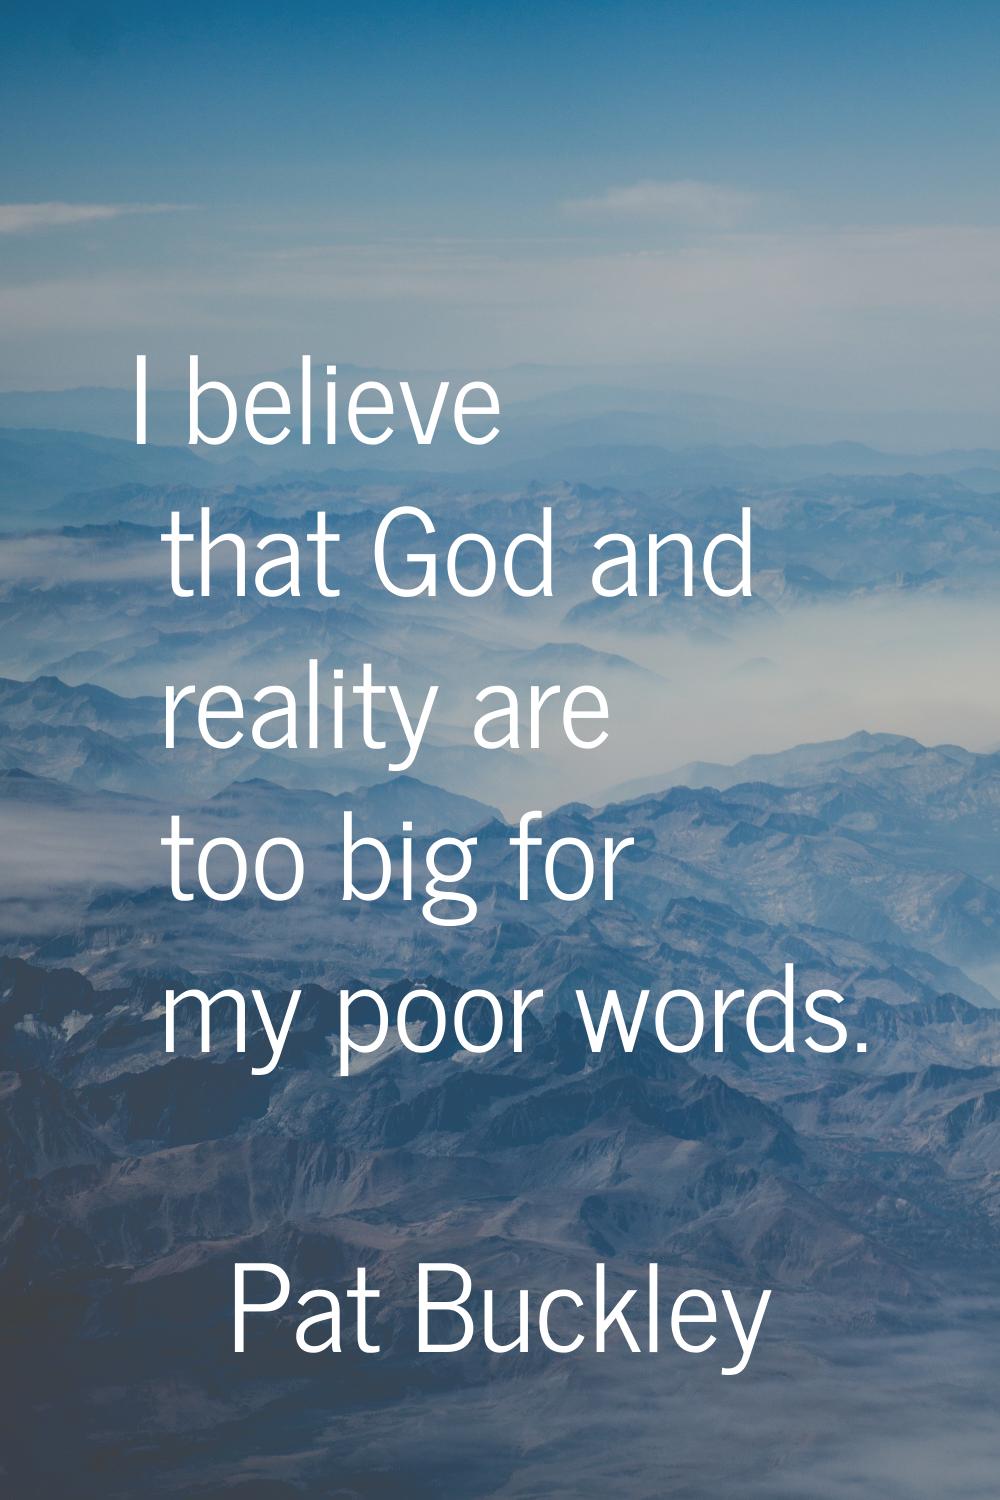 I believe that God and reality are too big for my poor words.